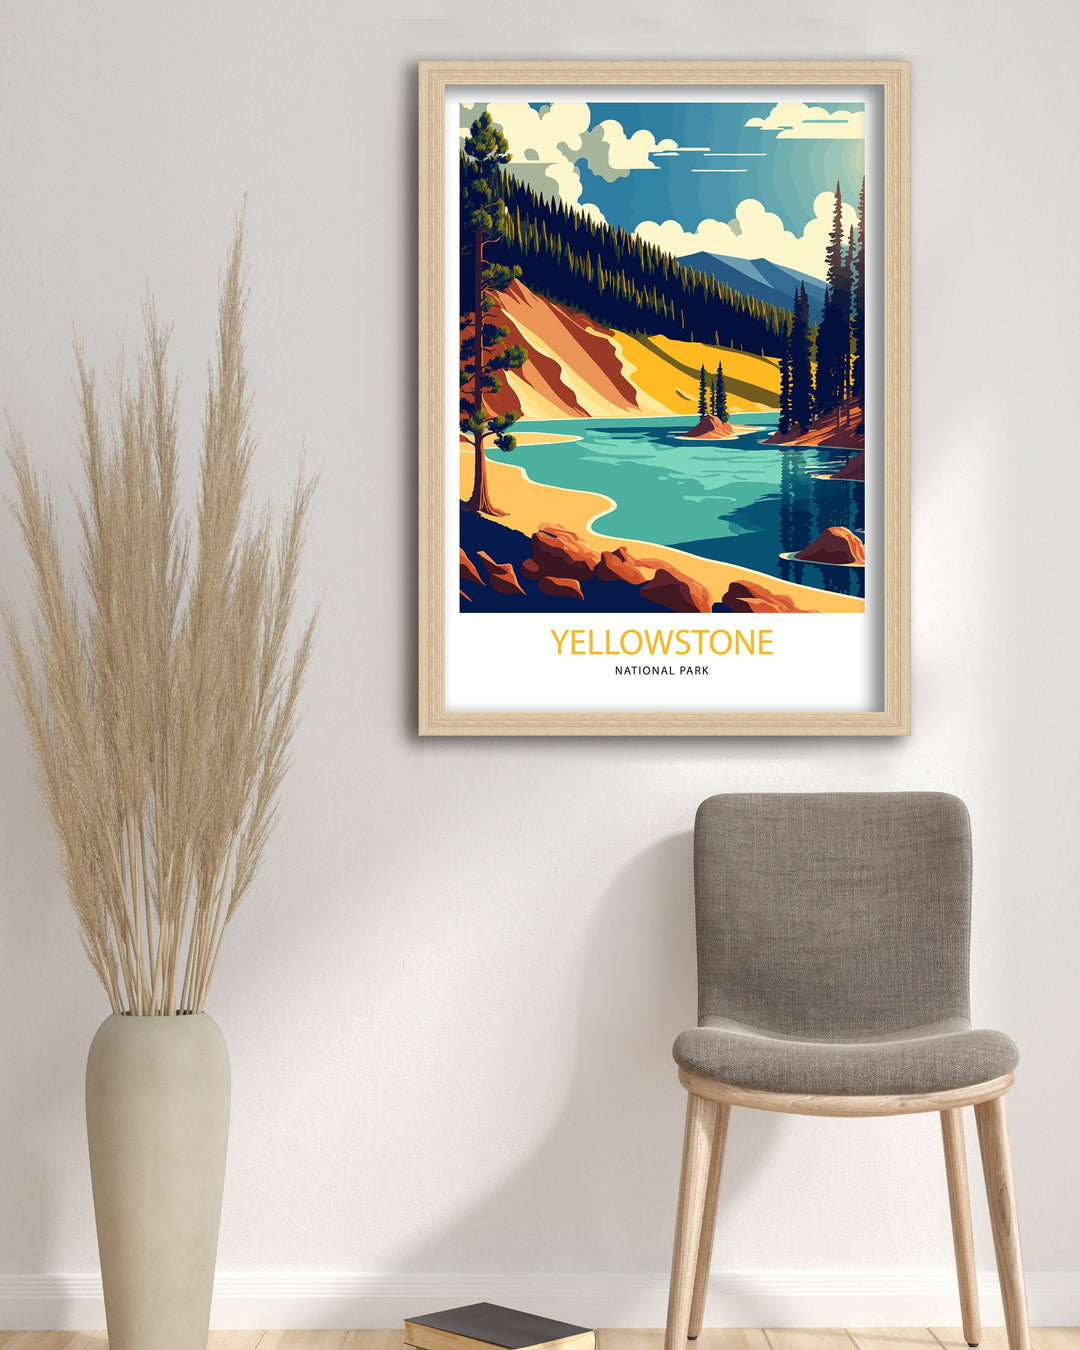 Yellowstone National Park Travel Poster | Yellowstone Poster